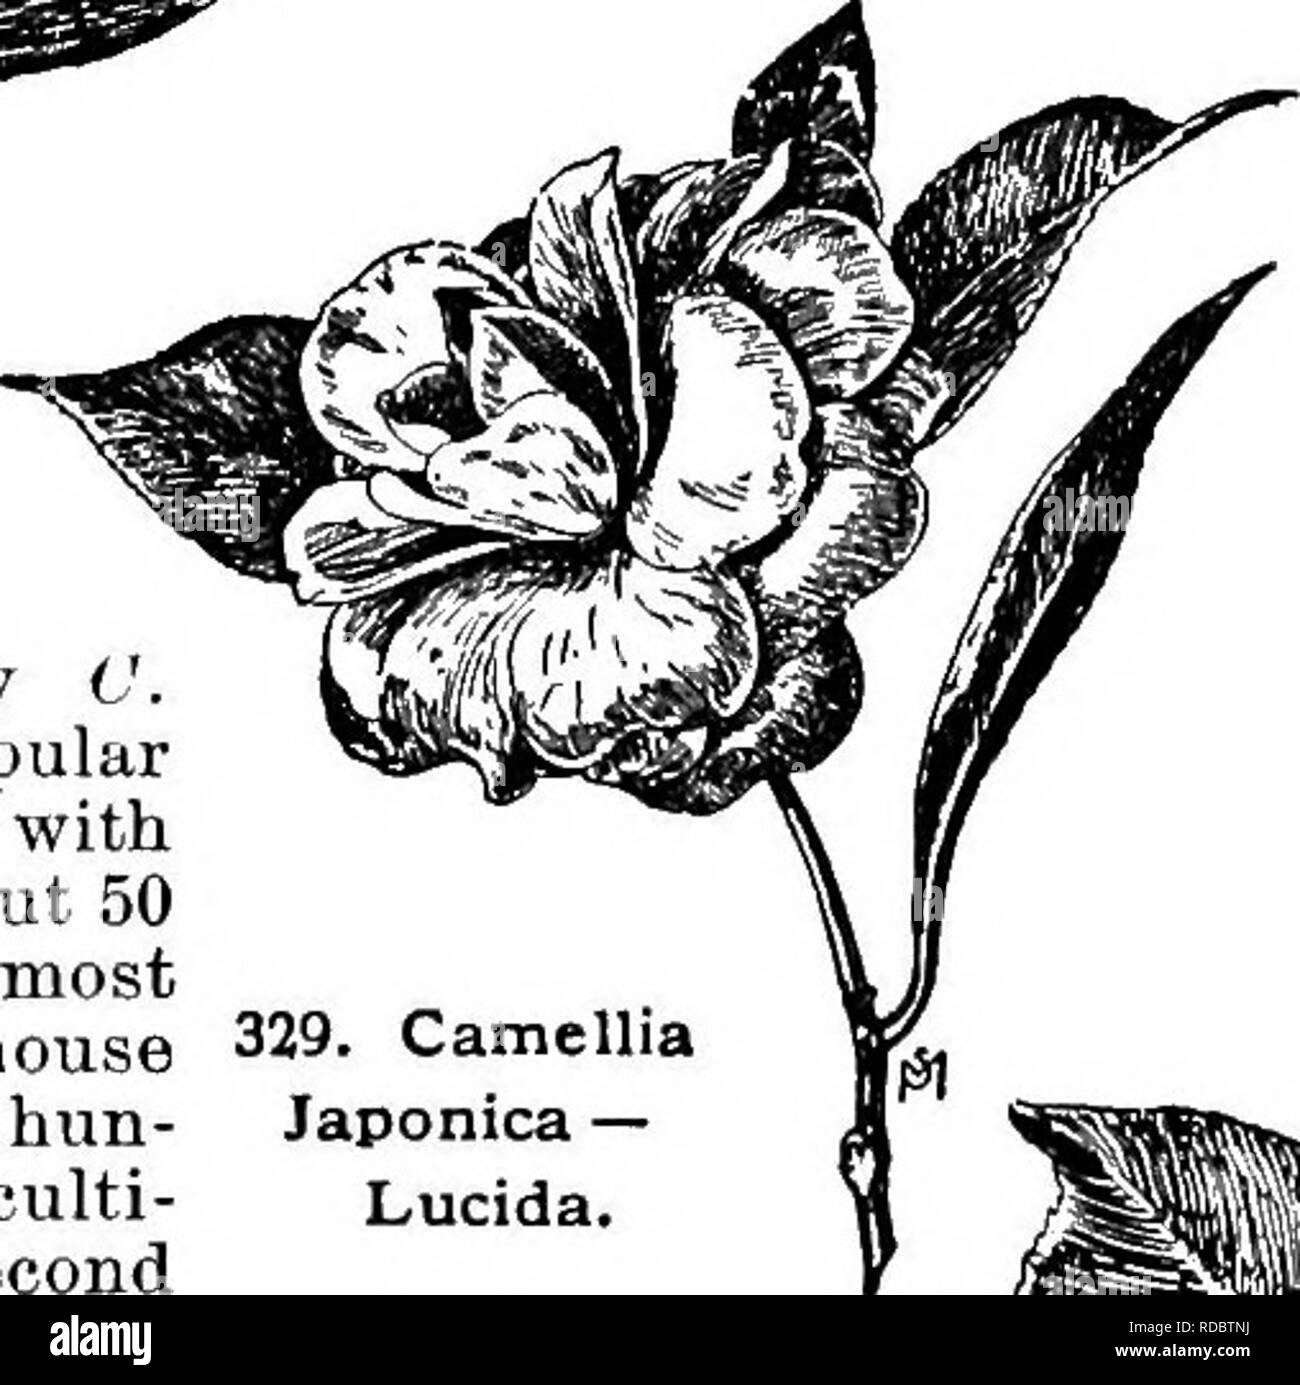 . Cyclopedia of American horticulture, comprising suggestions for cultivation of horticultural plants, descriptions of the species of fruits, vegetables, flowers, and ornamental plants sold in the United States and Canada, together with geographical and biographical sketches. Gardening. 329. Camellia Japonica — Lucida. CAU£LLIA (after George Joseph Kamel or Camellus, a Moravian Jesuit, who traveled in Asia in the seventeenth century). Ternstrwmihcece. Evergreen trees or shrubs; Ivs. alternate, short-petioled, serrate: fls. large, axillary or terminal, usually solitary, white or red ; sepals an Stock Photo